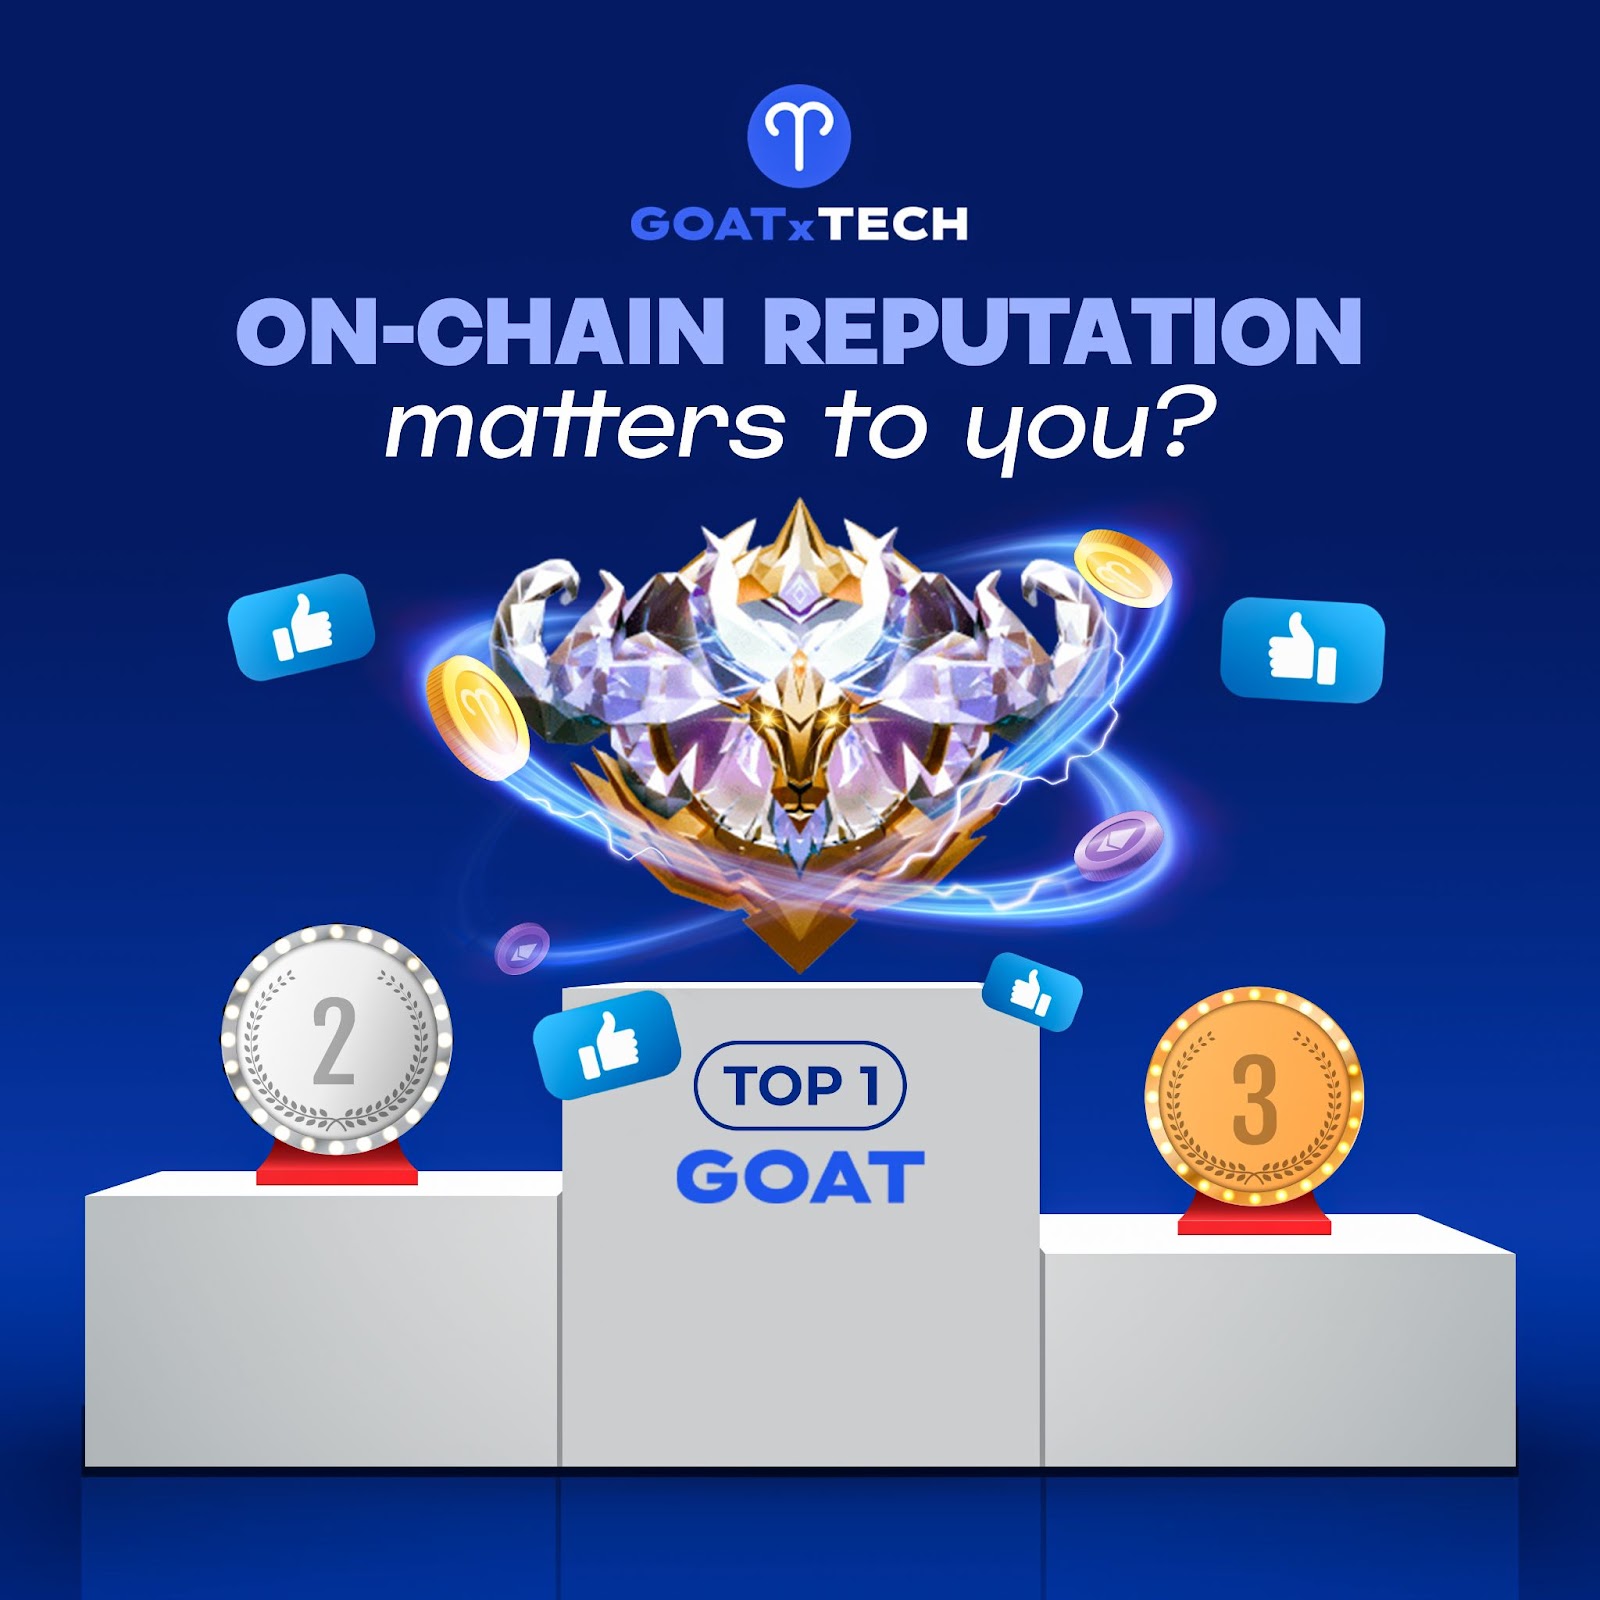  Goat.Tech plans to introduce Goat L2, the first Layer 2 designed specifically for on-chain reputation